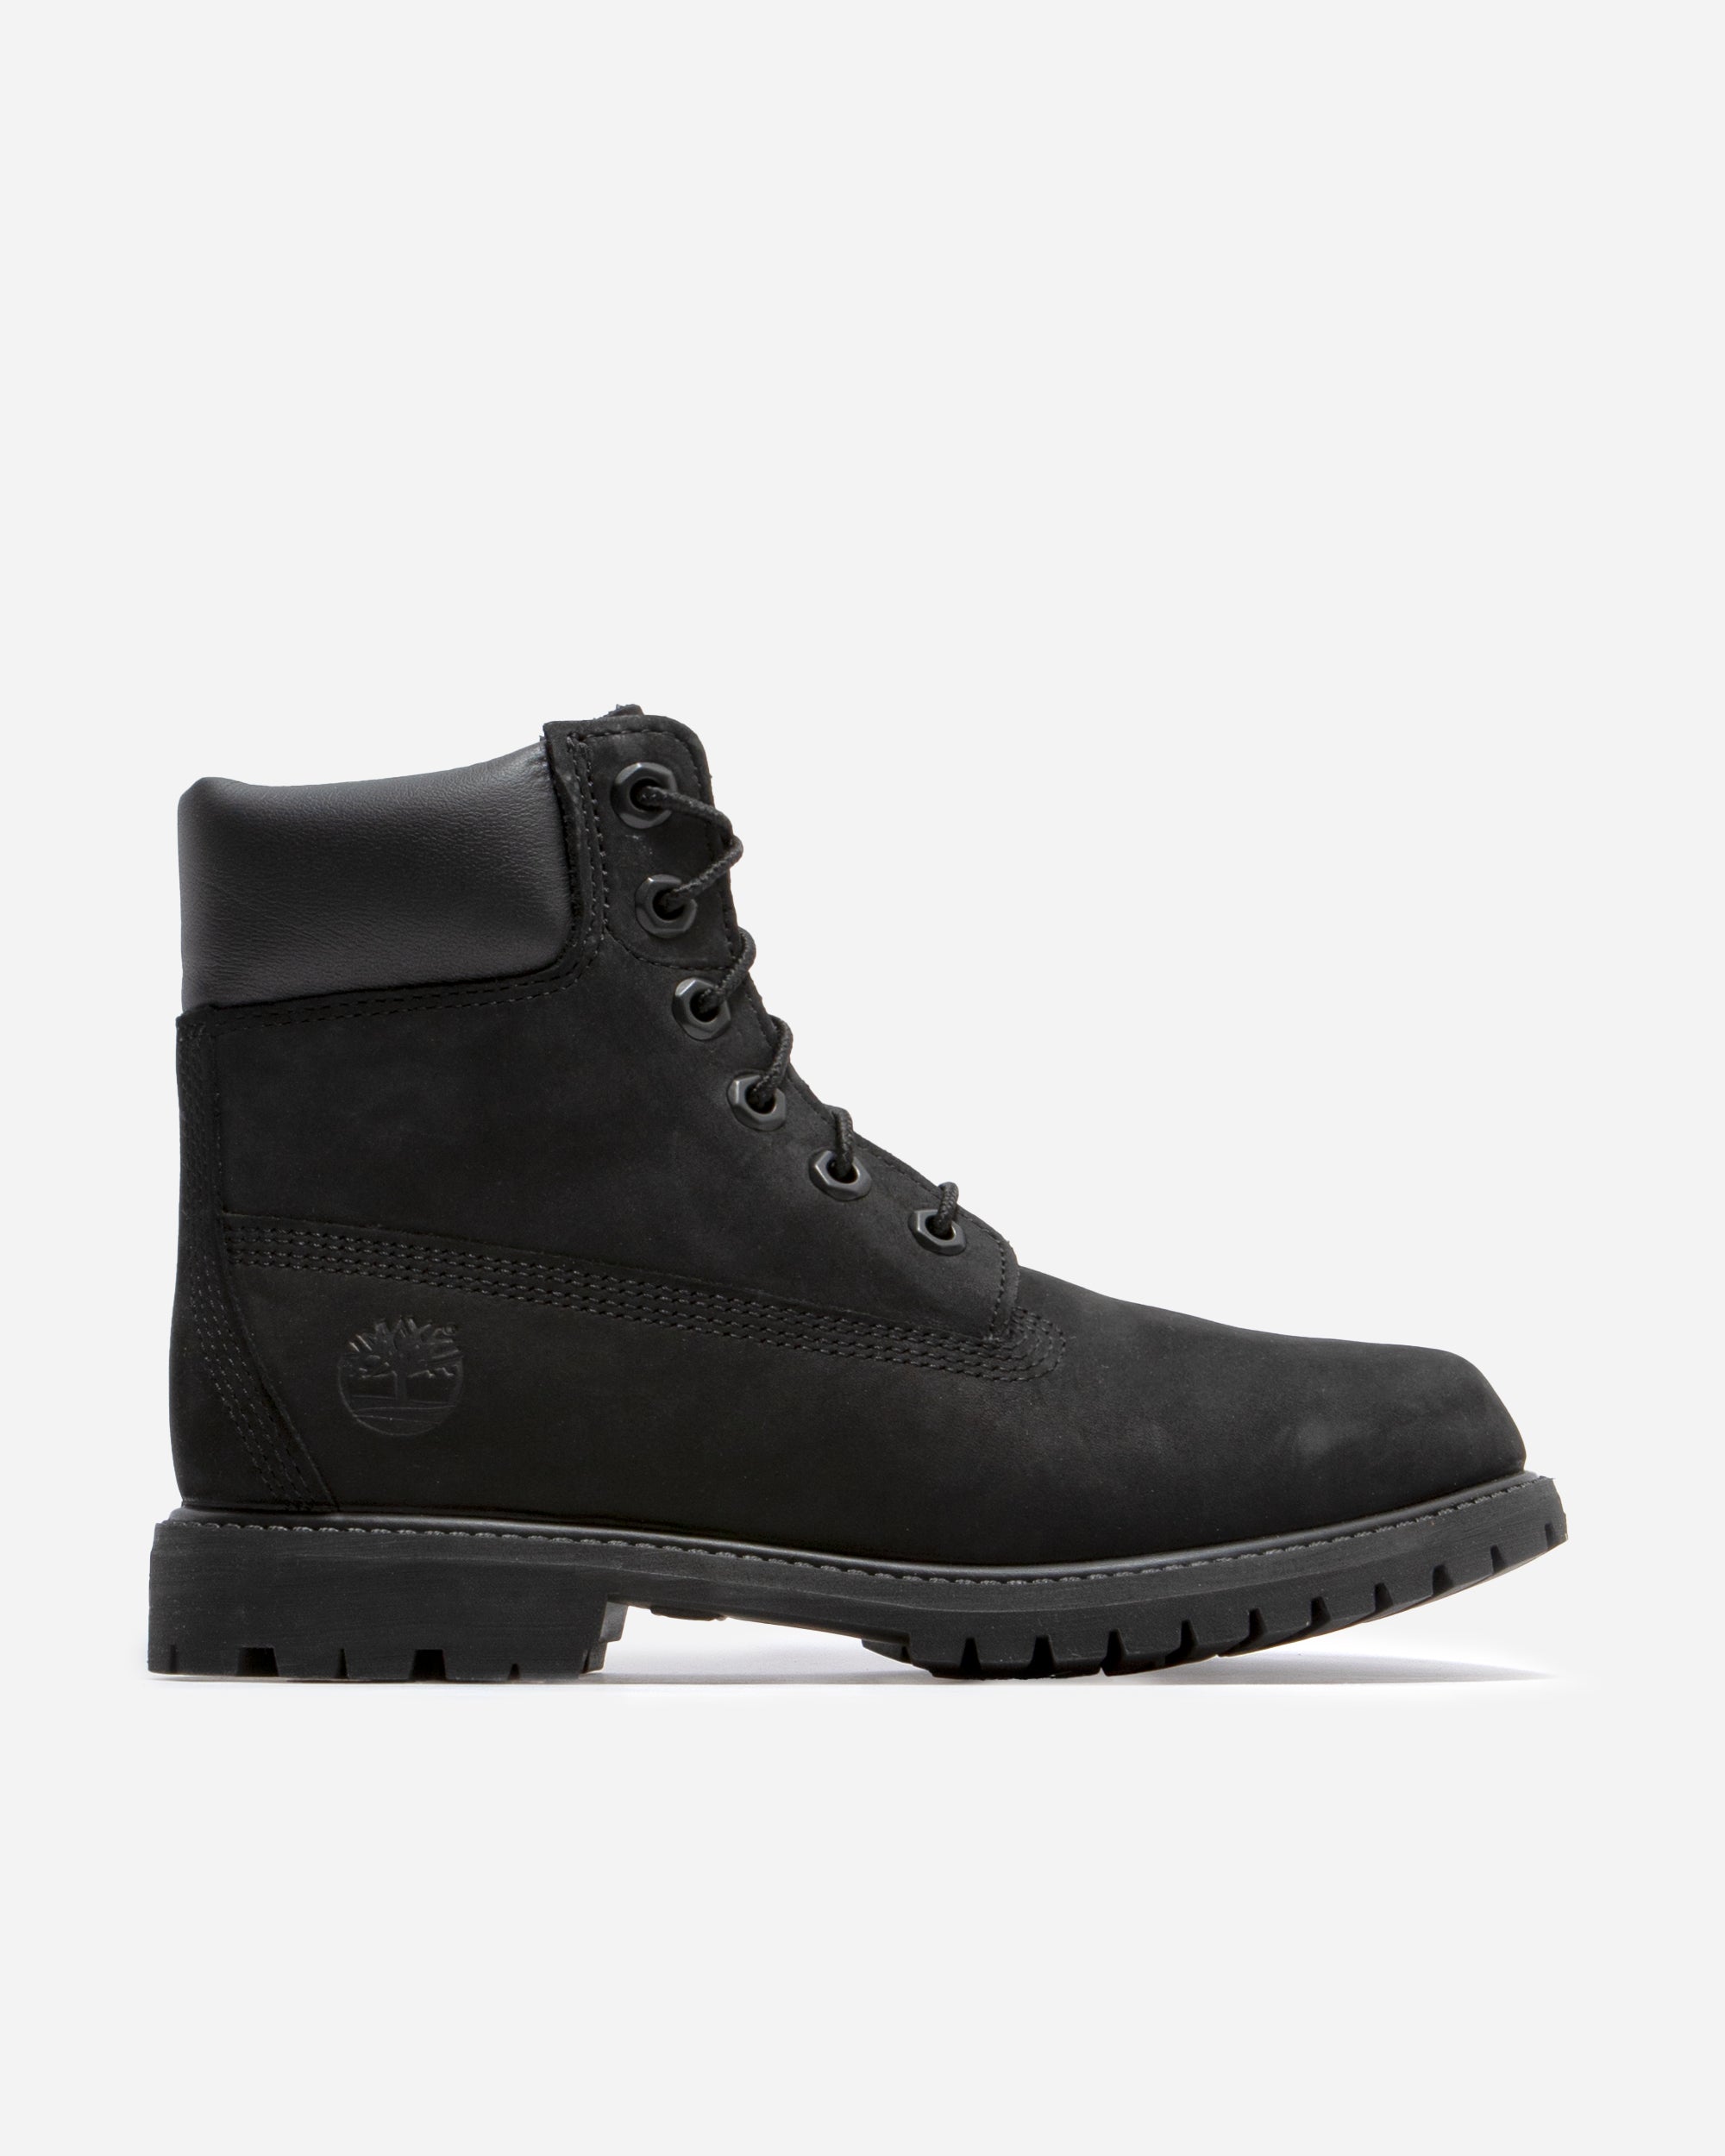 Timberland Premium 6 Inch Lace Up Waterproof Boot BLACK TB08658A0011